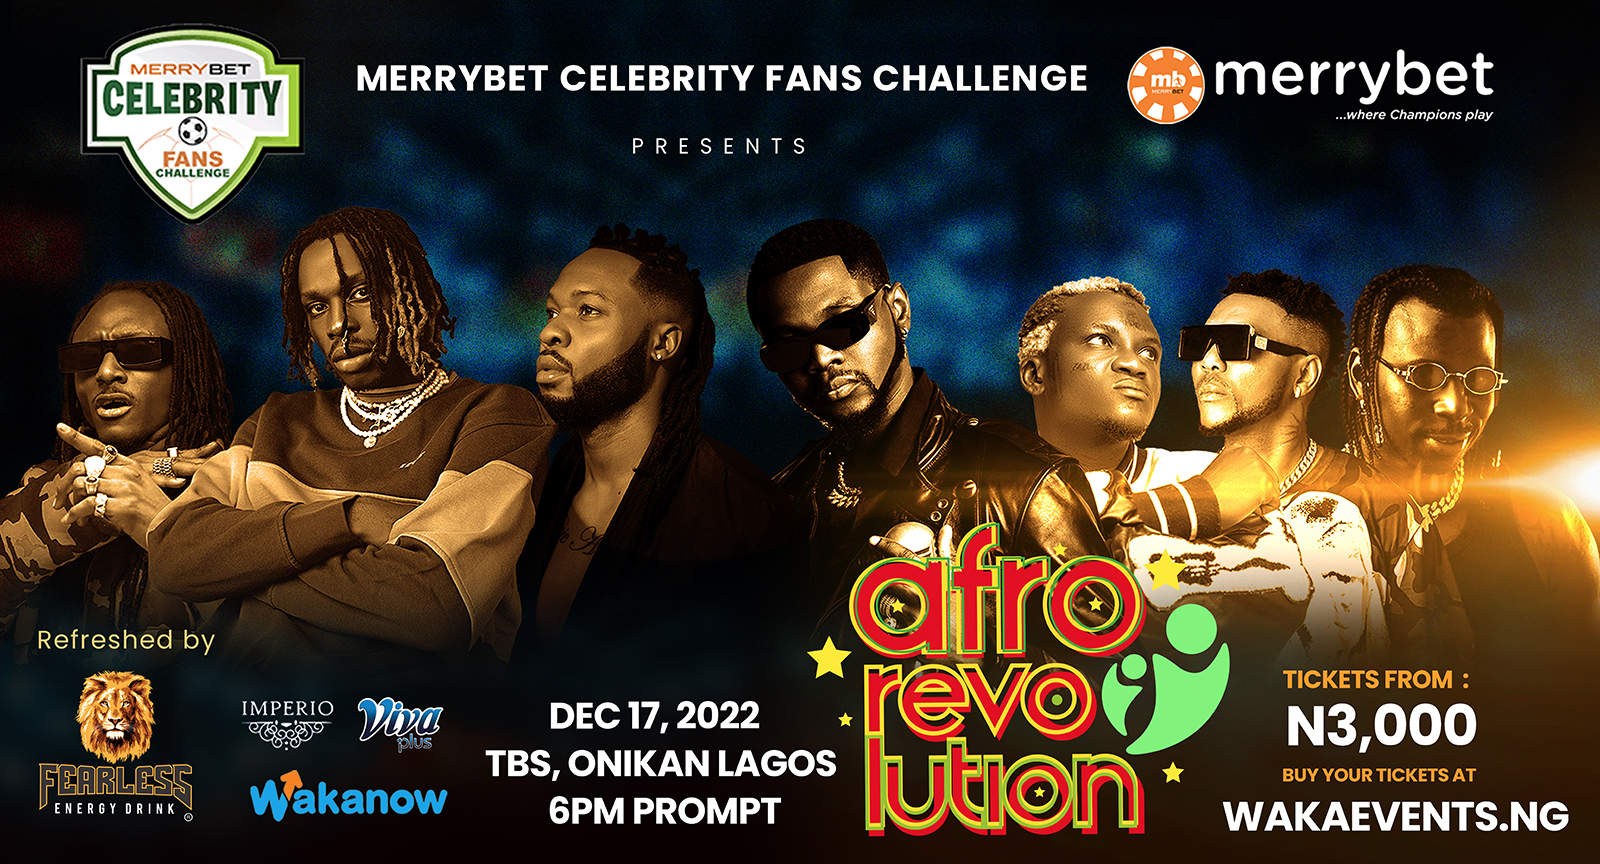 5 Reasons You Shouldn’t Miss Merrybet Celebrity Fans Challenge This Weekend